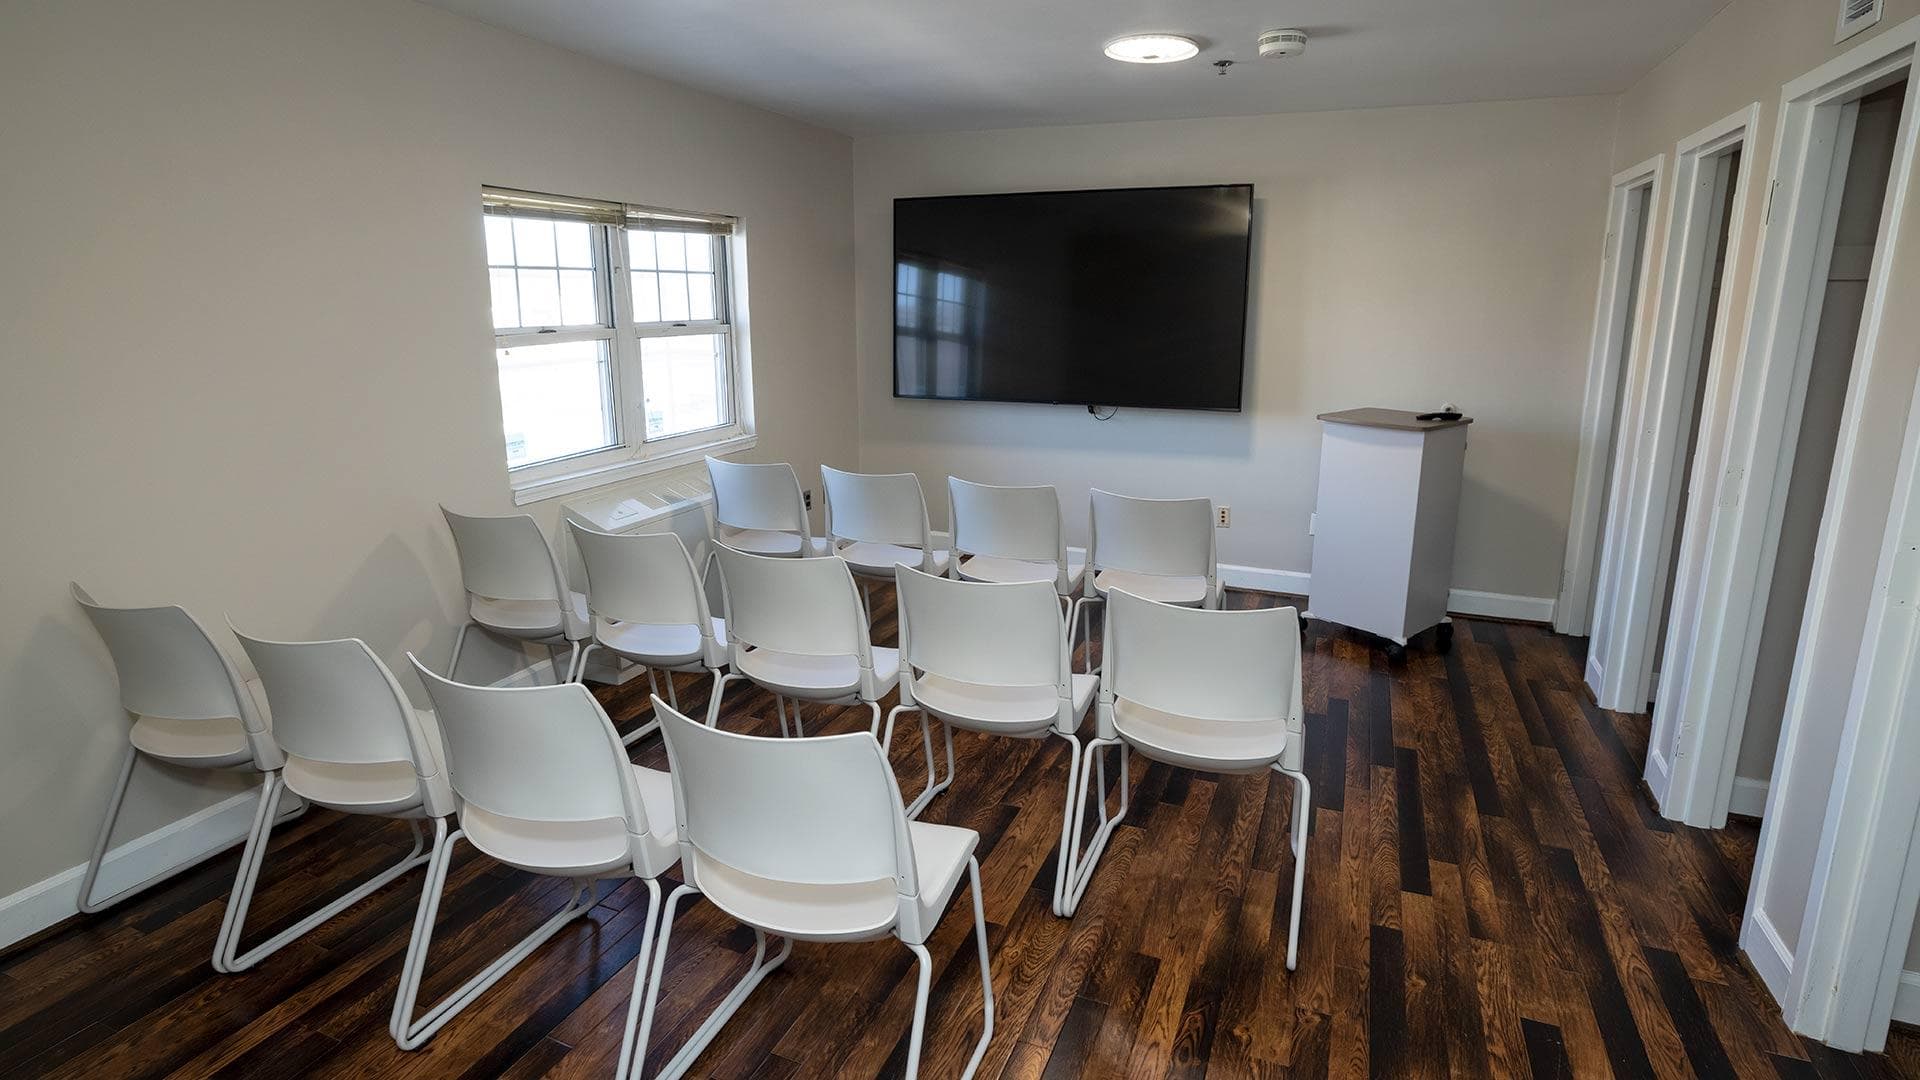 Meeting room with chairs, a podium and a TV